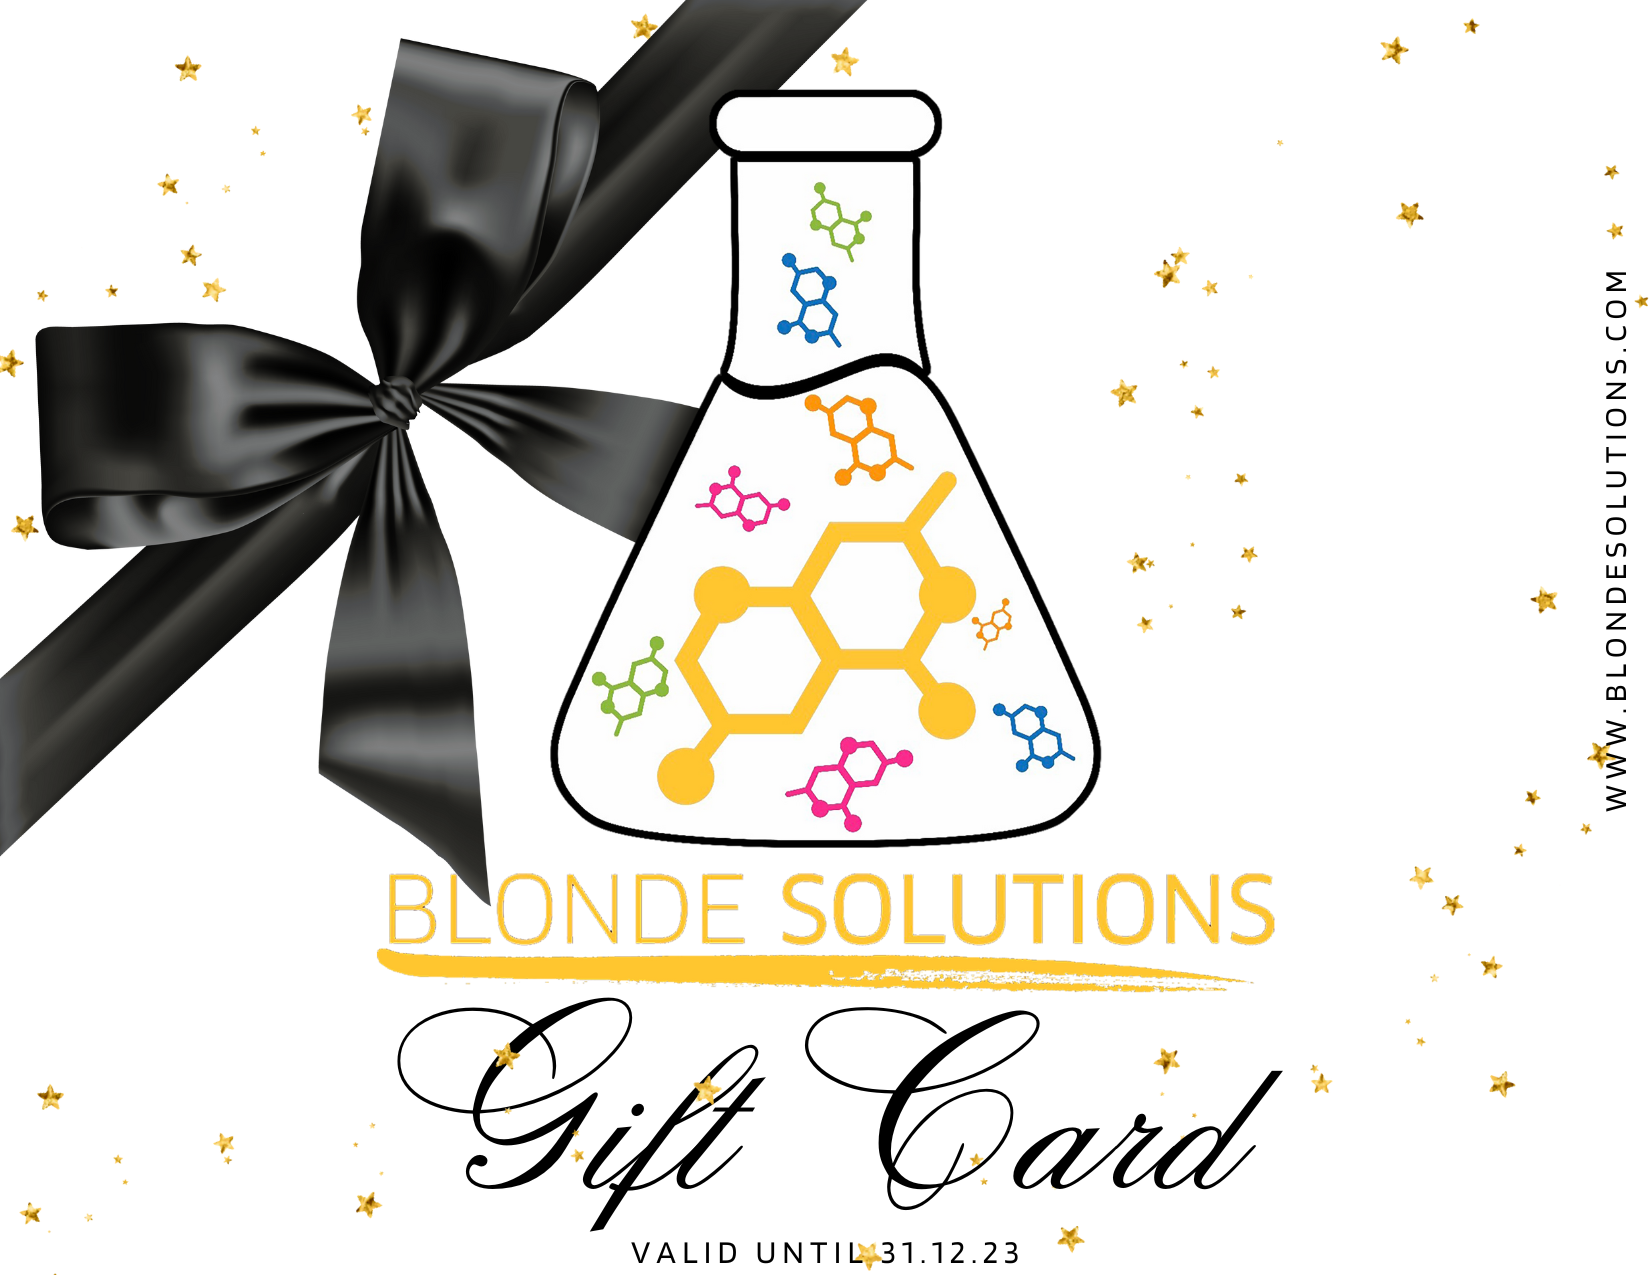 Blonde Solutions Gift card